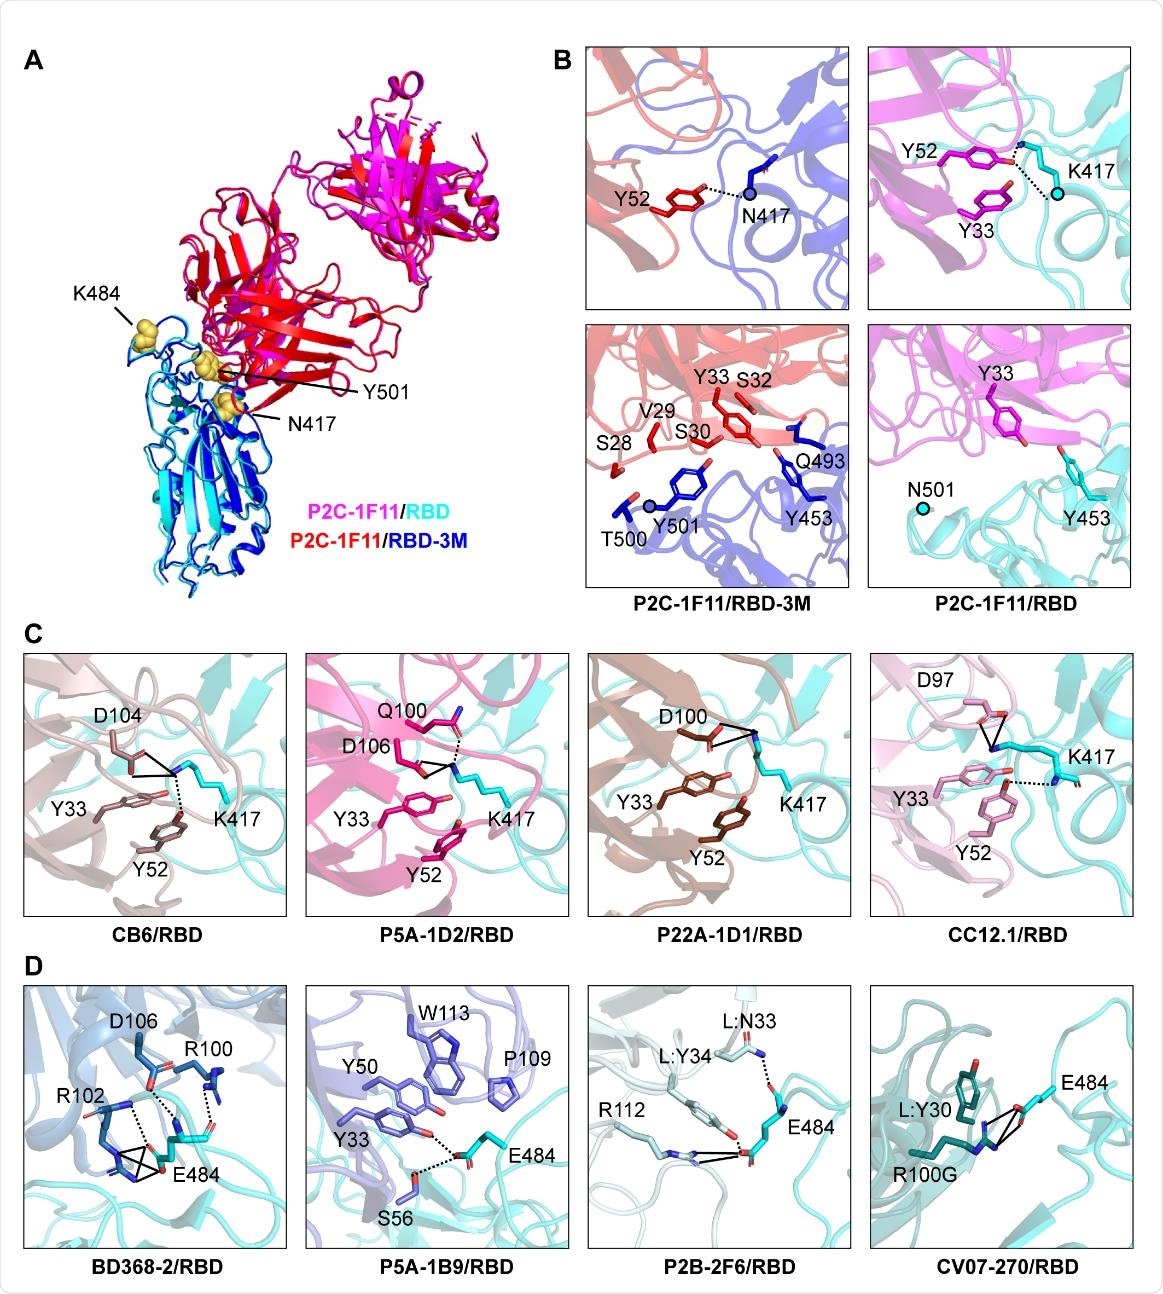 Structural basis for mAb neutralization and escape. (A) P2C-1F11/RBD224 3M crystal structure superposed onto P2C-1F11/RBD crystal structure (PDB: 7CDI). P2C-1F11 is colored with magenta and RBD is colored with cyan in the P2C-1F11/RBD complex. The P2C-1F11 and RBD-3M are colored with red and blue respectively in the P2C-1F11/RBD-3M complex. The three RBD-3M mutated residues (N417, K484, and Y501) are shown as yellow-colored spheres. (B) Interactions with P2C-1F11 around RBD-3M N417 and Y501 (left panel) and wildtype RBD K417 and N501 (right panel). (C) Interactions between K417 and representative Class I IGHV3-53/3-66 antibodies CB6, P5A-1D2, P22A-1D1 and CC12.1. (D) Interactions between E484 and Class II antibodies BD368-2, P5A-1B9, P2B-2F6 and CV07-270. For panel (C) and (D), antibodies are shown with different colors; hydrogen bond and salt bridge are represented by dashed and black lines, respectively. CB6/RBD (PDB: 7C01), P5A235 1D2/RBD (PDB: 7CHO), P22A-1D1/RBD (PDB: 7CHS), CC12.1/RBD (PDB: 6XC2), BD368-2/RBD (PDB: 7CHC), P5A-1B9 (PDB: 7CZX), P2B-2F6 (PDB: 7BWJ), CV07-270 (PDB:6XKP).